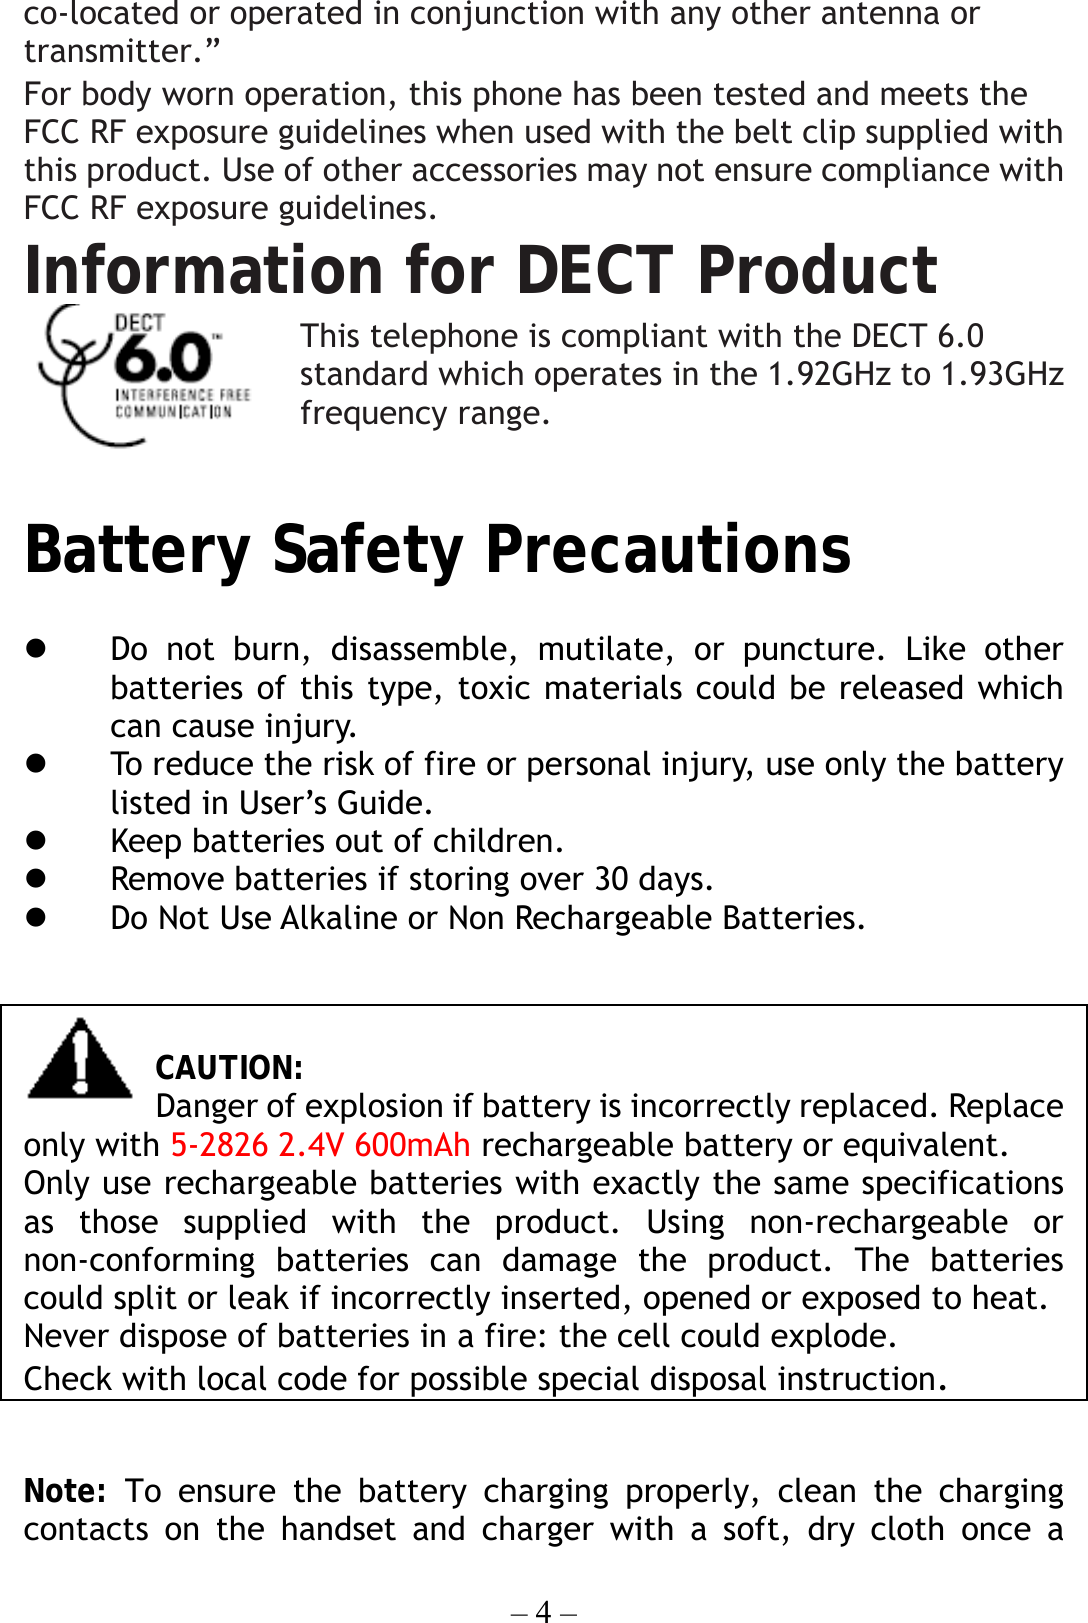 – 4 – co-located or operated in conjunction with any other antenna or transmitter.” For body worn operation, this phone has been tested and meets the FCC RF exposure guidelines when used with the belt clip supplied with this product. Use of other accessories may not ensure compliance with FCC RF exposure guidelines. Information for DECT Product This telephone is compliant with the DECT 6.0 standard which operates in the 1.92GHz to 1.93GHz frequency range.  Battery Safety Precautions             Do not burn, disassemble, mutilate, or puncture. Like other batteries of this type, toxic materials could be released which can cause injury.   To reduce the risk of fire or personal injury, use only the battery listed in User’s Guide.   Keep batteries out of children.   Remove batteries if storing over 30 days.   Do Not Use Alkaline or Non Rechargeable Batteries.   CAUTION: Danger of explosion if battery is incorrectly replaced. Replace only with 5-2826 2.4V 600mAh rechargeable battery or equivalent. Only use rechargeable batteries with exactly the same specifications as those supplied with the product. Using non-rechargeable or non-conforming batteries can damage the product. The batteries could split or leak if incorrectly inserted, opened or exposed to heat. Never dispose of batteries in a fire: the cell could explode. Check with local code for possible special disposal instruction.  Note: To ensure the battery charging properly, clean the charging contacts on the handset and charger with a soft, dry cloth once a 